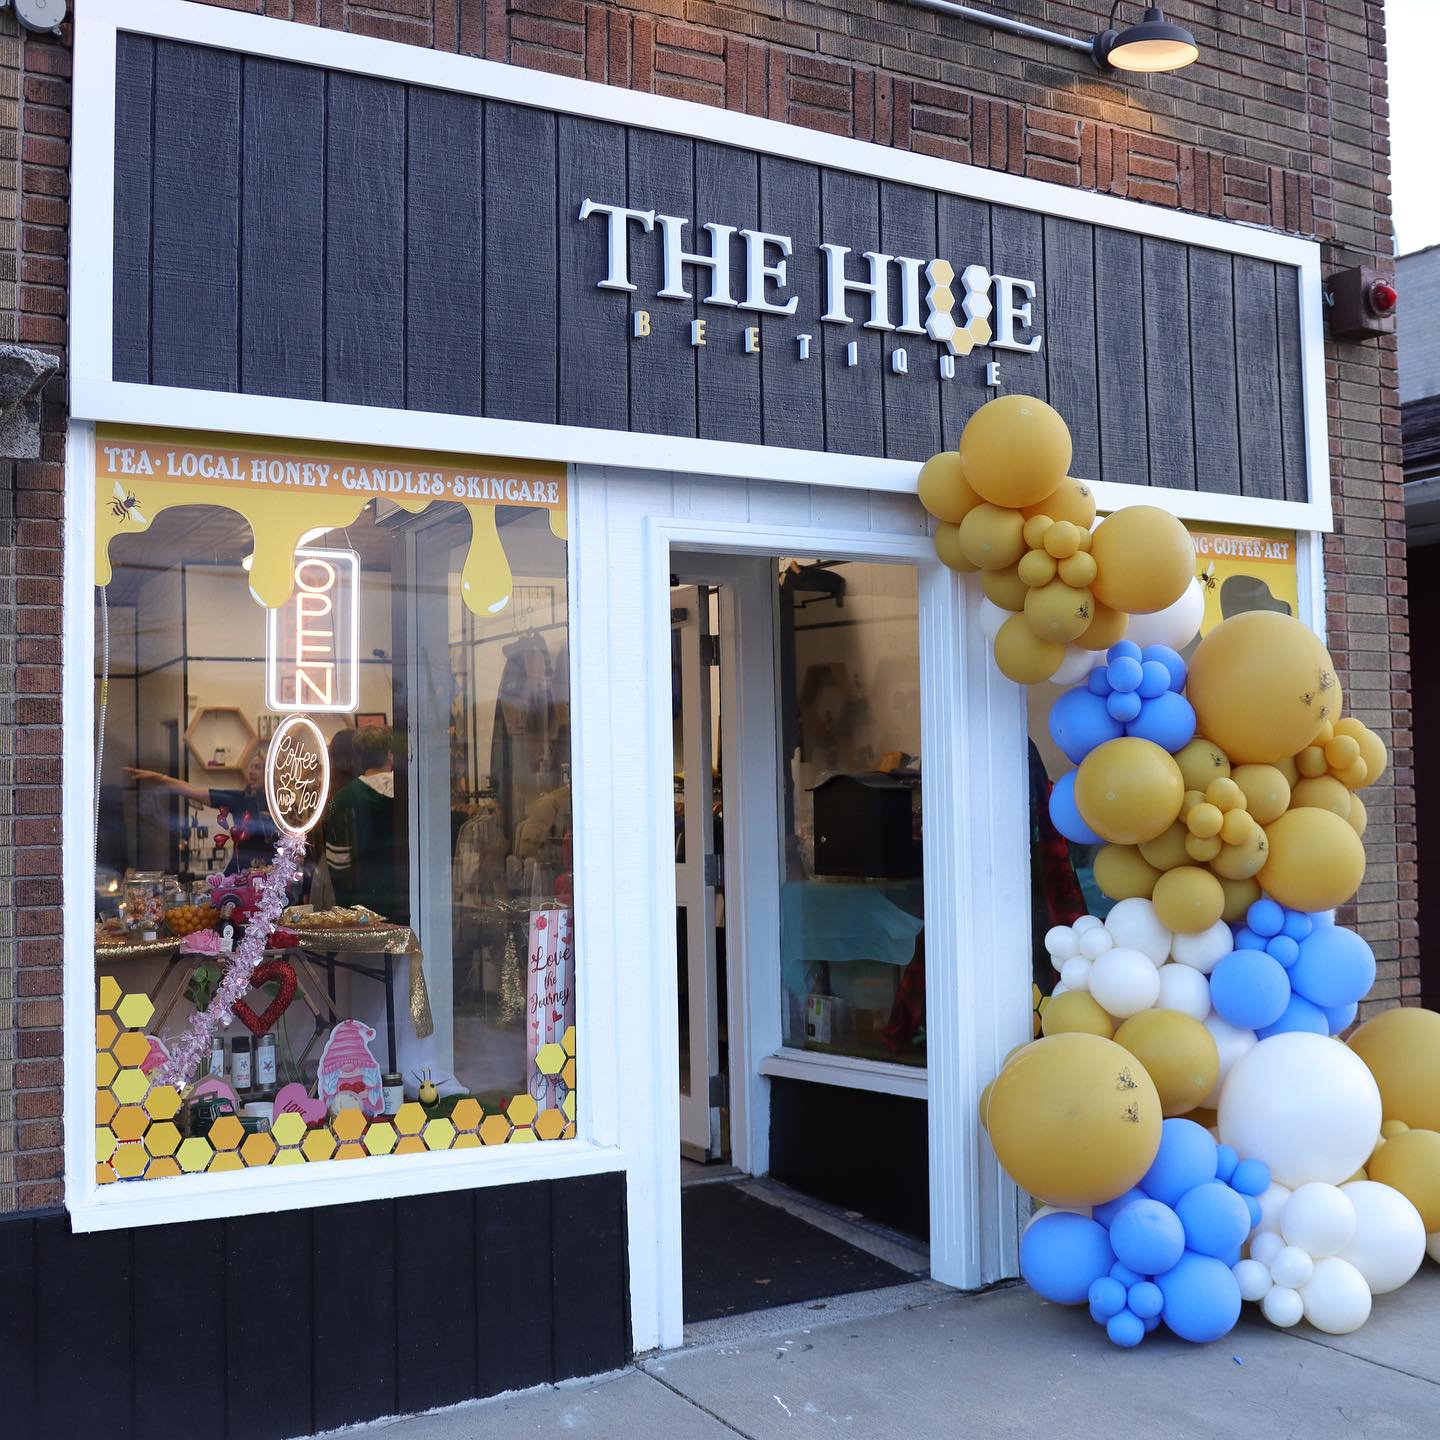 🍯Have you buzzed by @thehive585 yet ❓ 

We are located @ 272 N. Winton Rd. in the north winton village of Rochester New York and open Wednesday-Sunday. Visit The Hive Beetique google listing for spring hours❗️

Shop our sweet collection of local and specially curated goods. 🤗 

Some of my favorite beautiful souls and moments from @thehive585 grand opening last month 🥰 more coming this week 📸💙 

I still can’t thank everyone enough for your continued support and love. 🙏🏼

You bring more sweetness inside the hive and I’m so blessed and thankful to share it with you all❗️🍯😍

#thehive585 #hivebeetique #hintofher #reyescollective #rochesterny #585 #shoplocal #supportsmallbusiness #hometown #localhoney #localbrands #speciallycurated